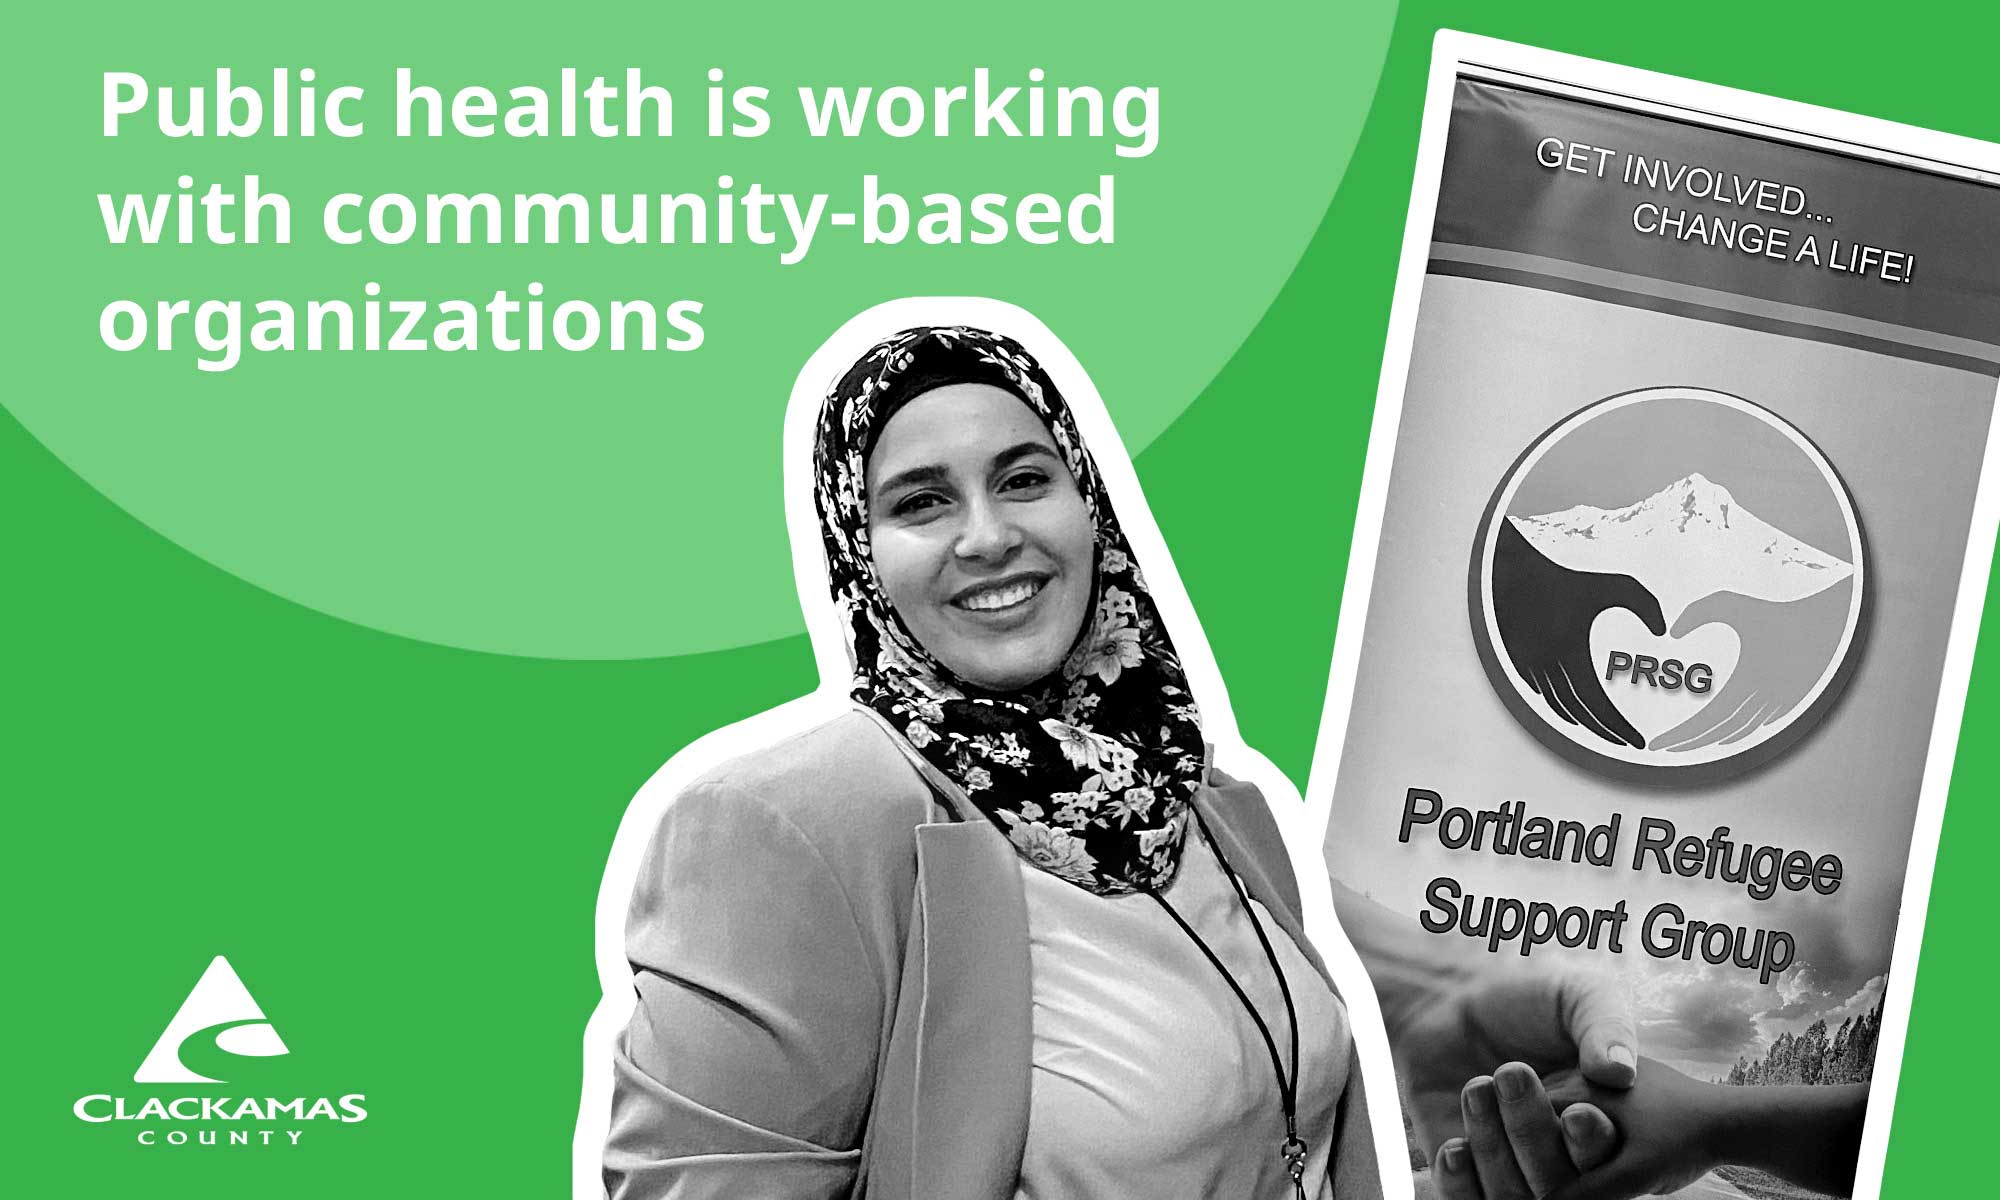 Public health is working with community-based organizations